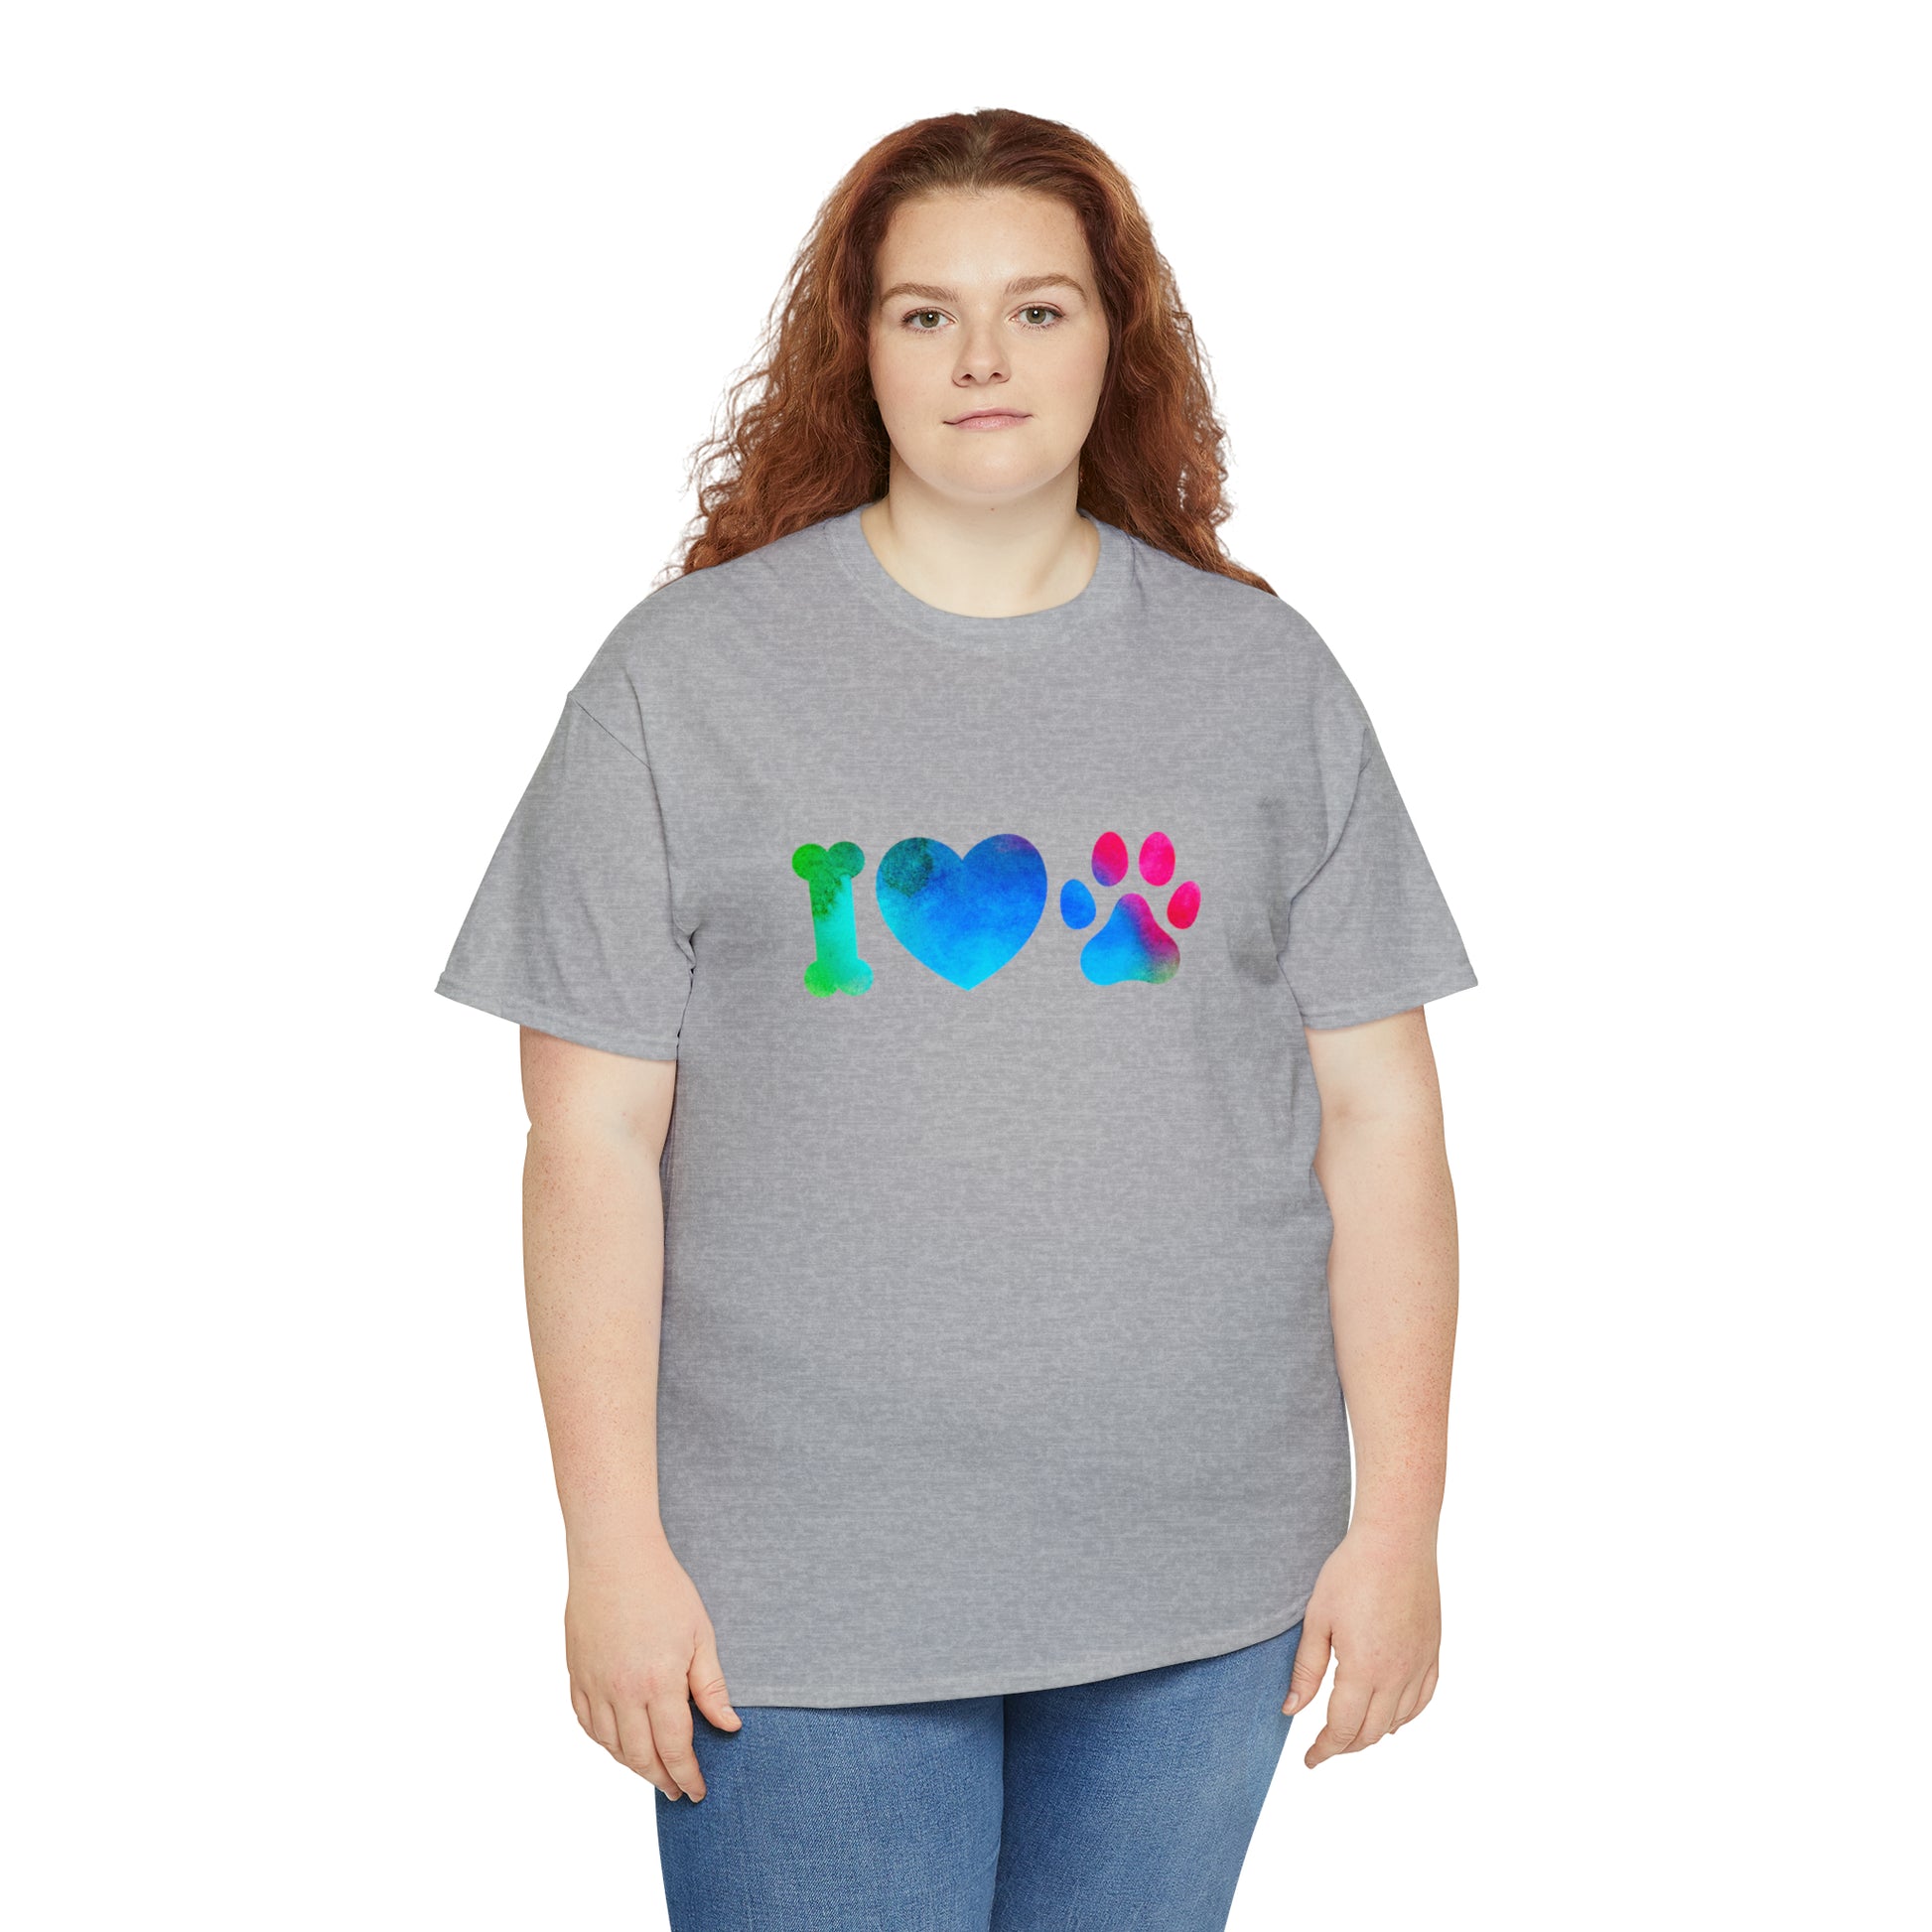 Mock up of a plus-size woman wearing the shirt